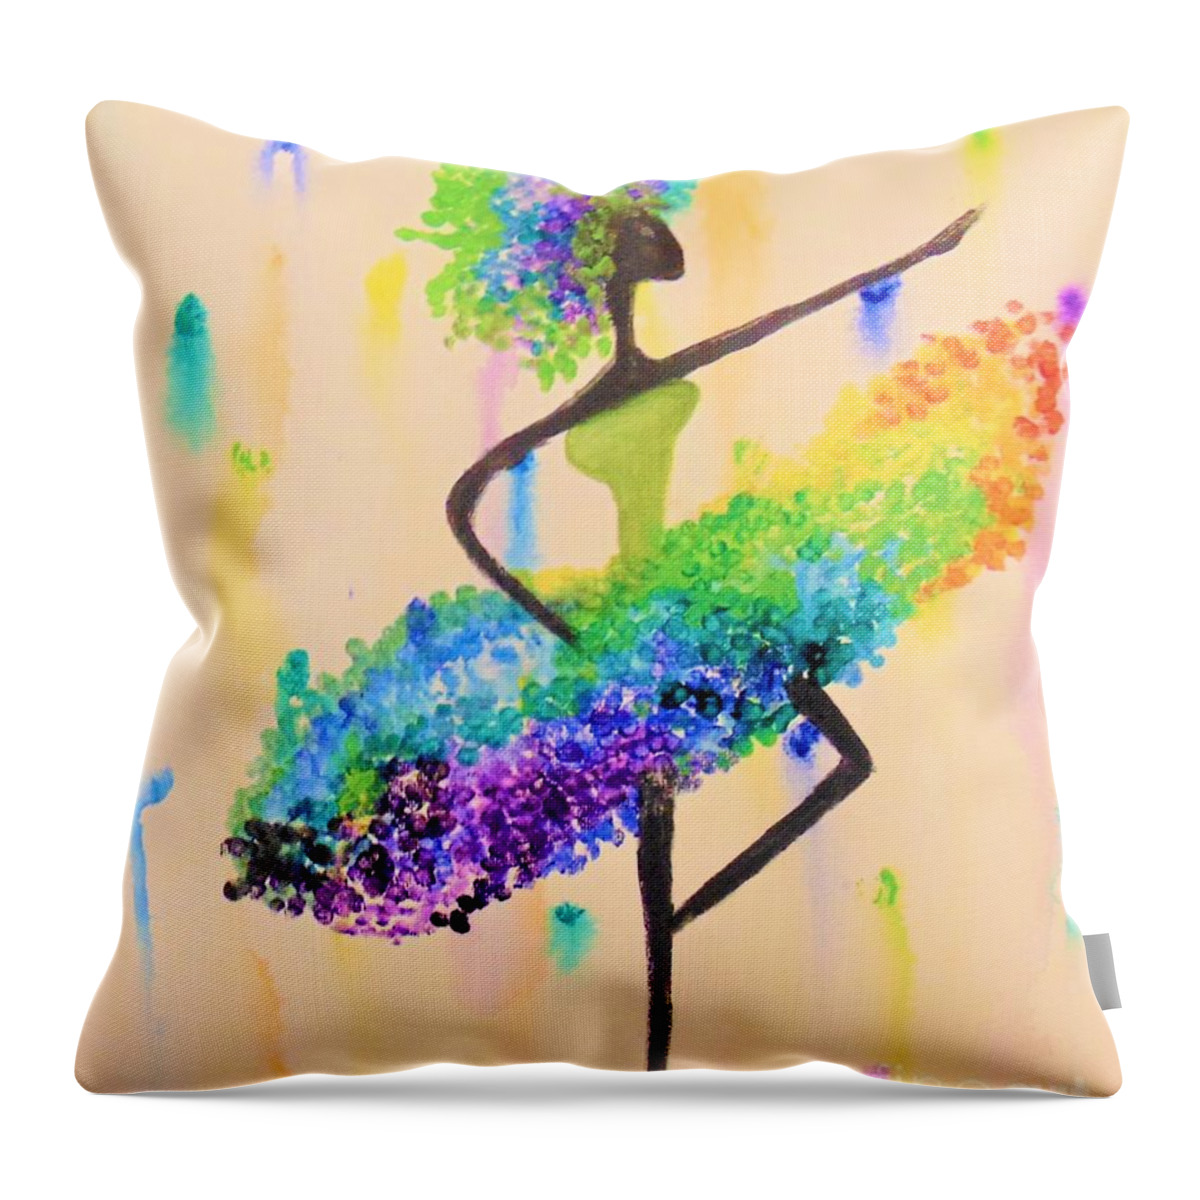 Dance Throw Pillow featuring the painting Dance by Saundra Johnson